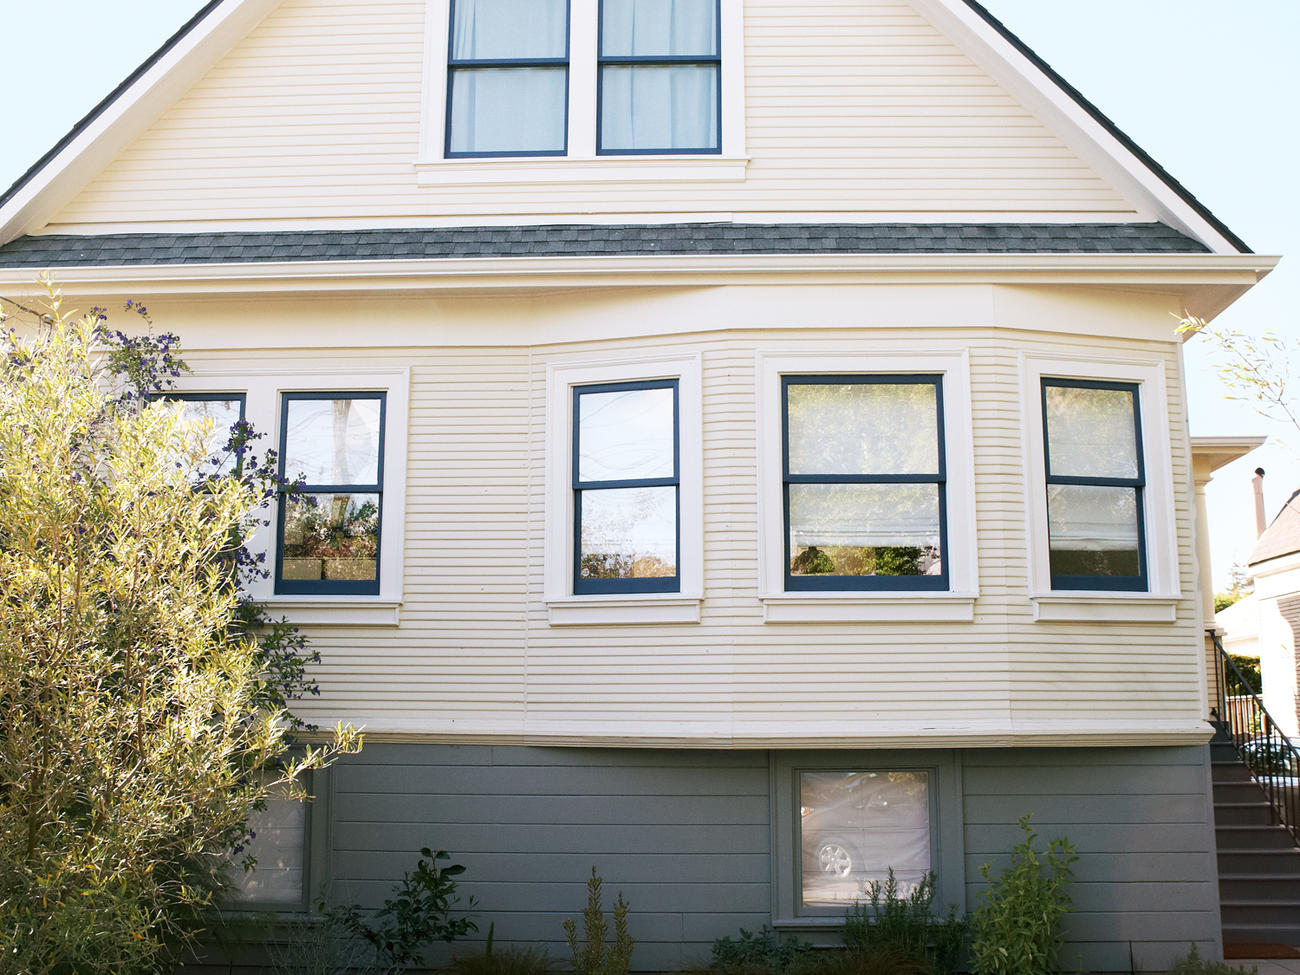 Paint Your House This Color and It Could Sell For Almost $5,000 More